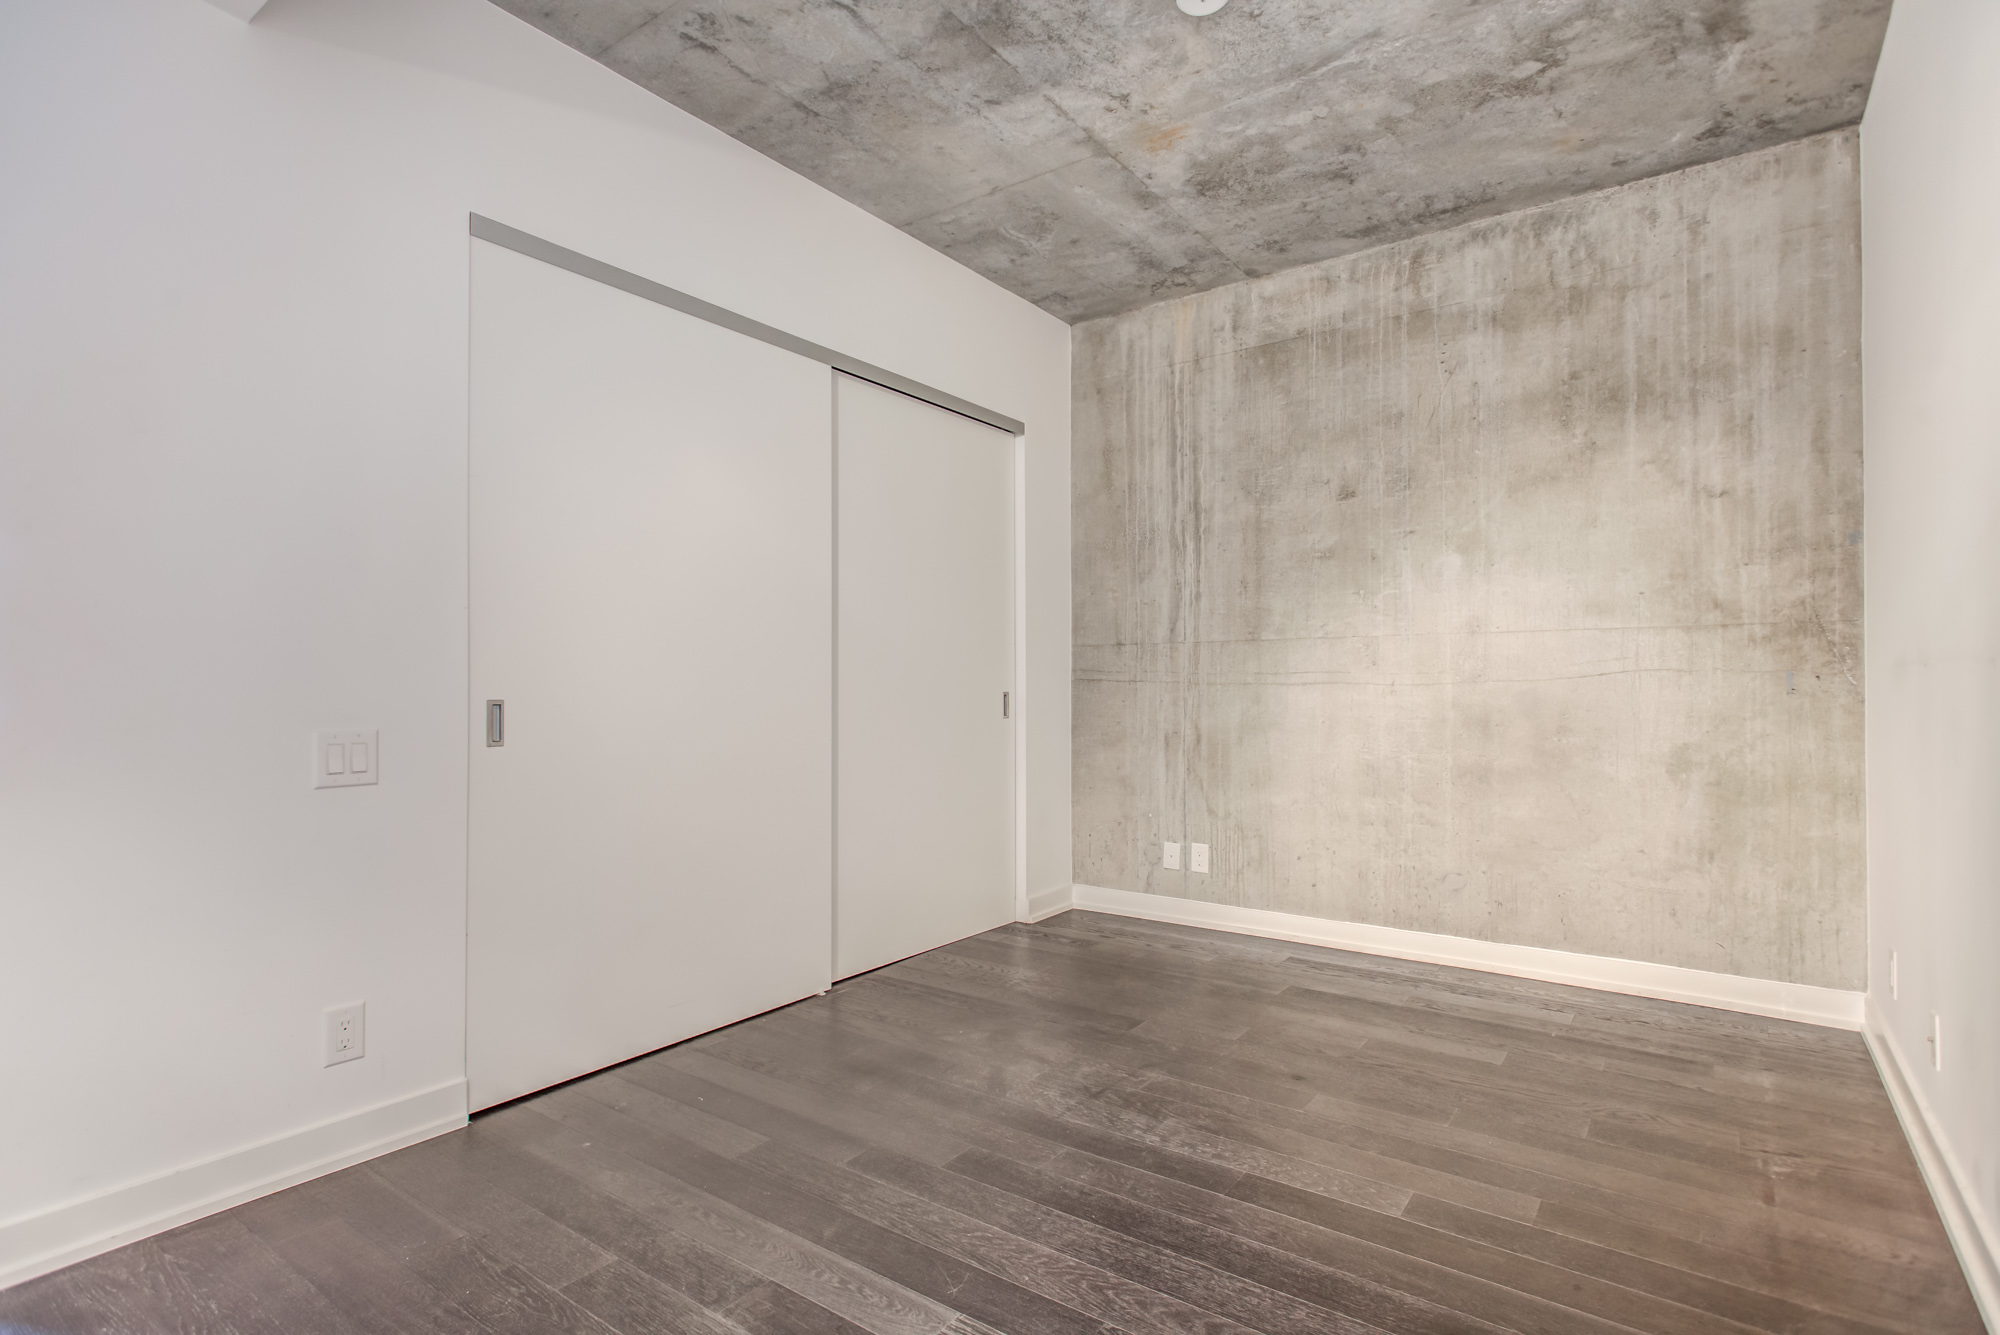 39 Brant St Unit 918, Brant Park Lofts, in Queen West, master bedroom with exposed ceiling and wall.